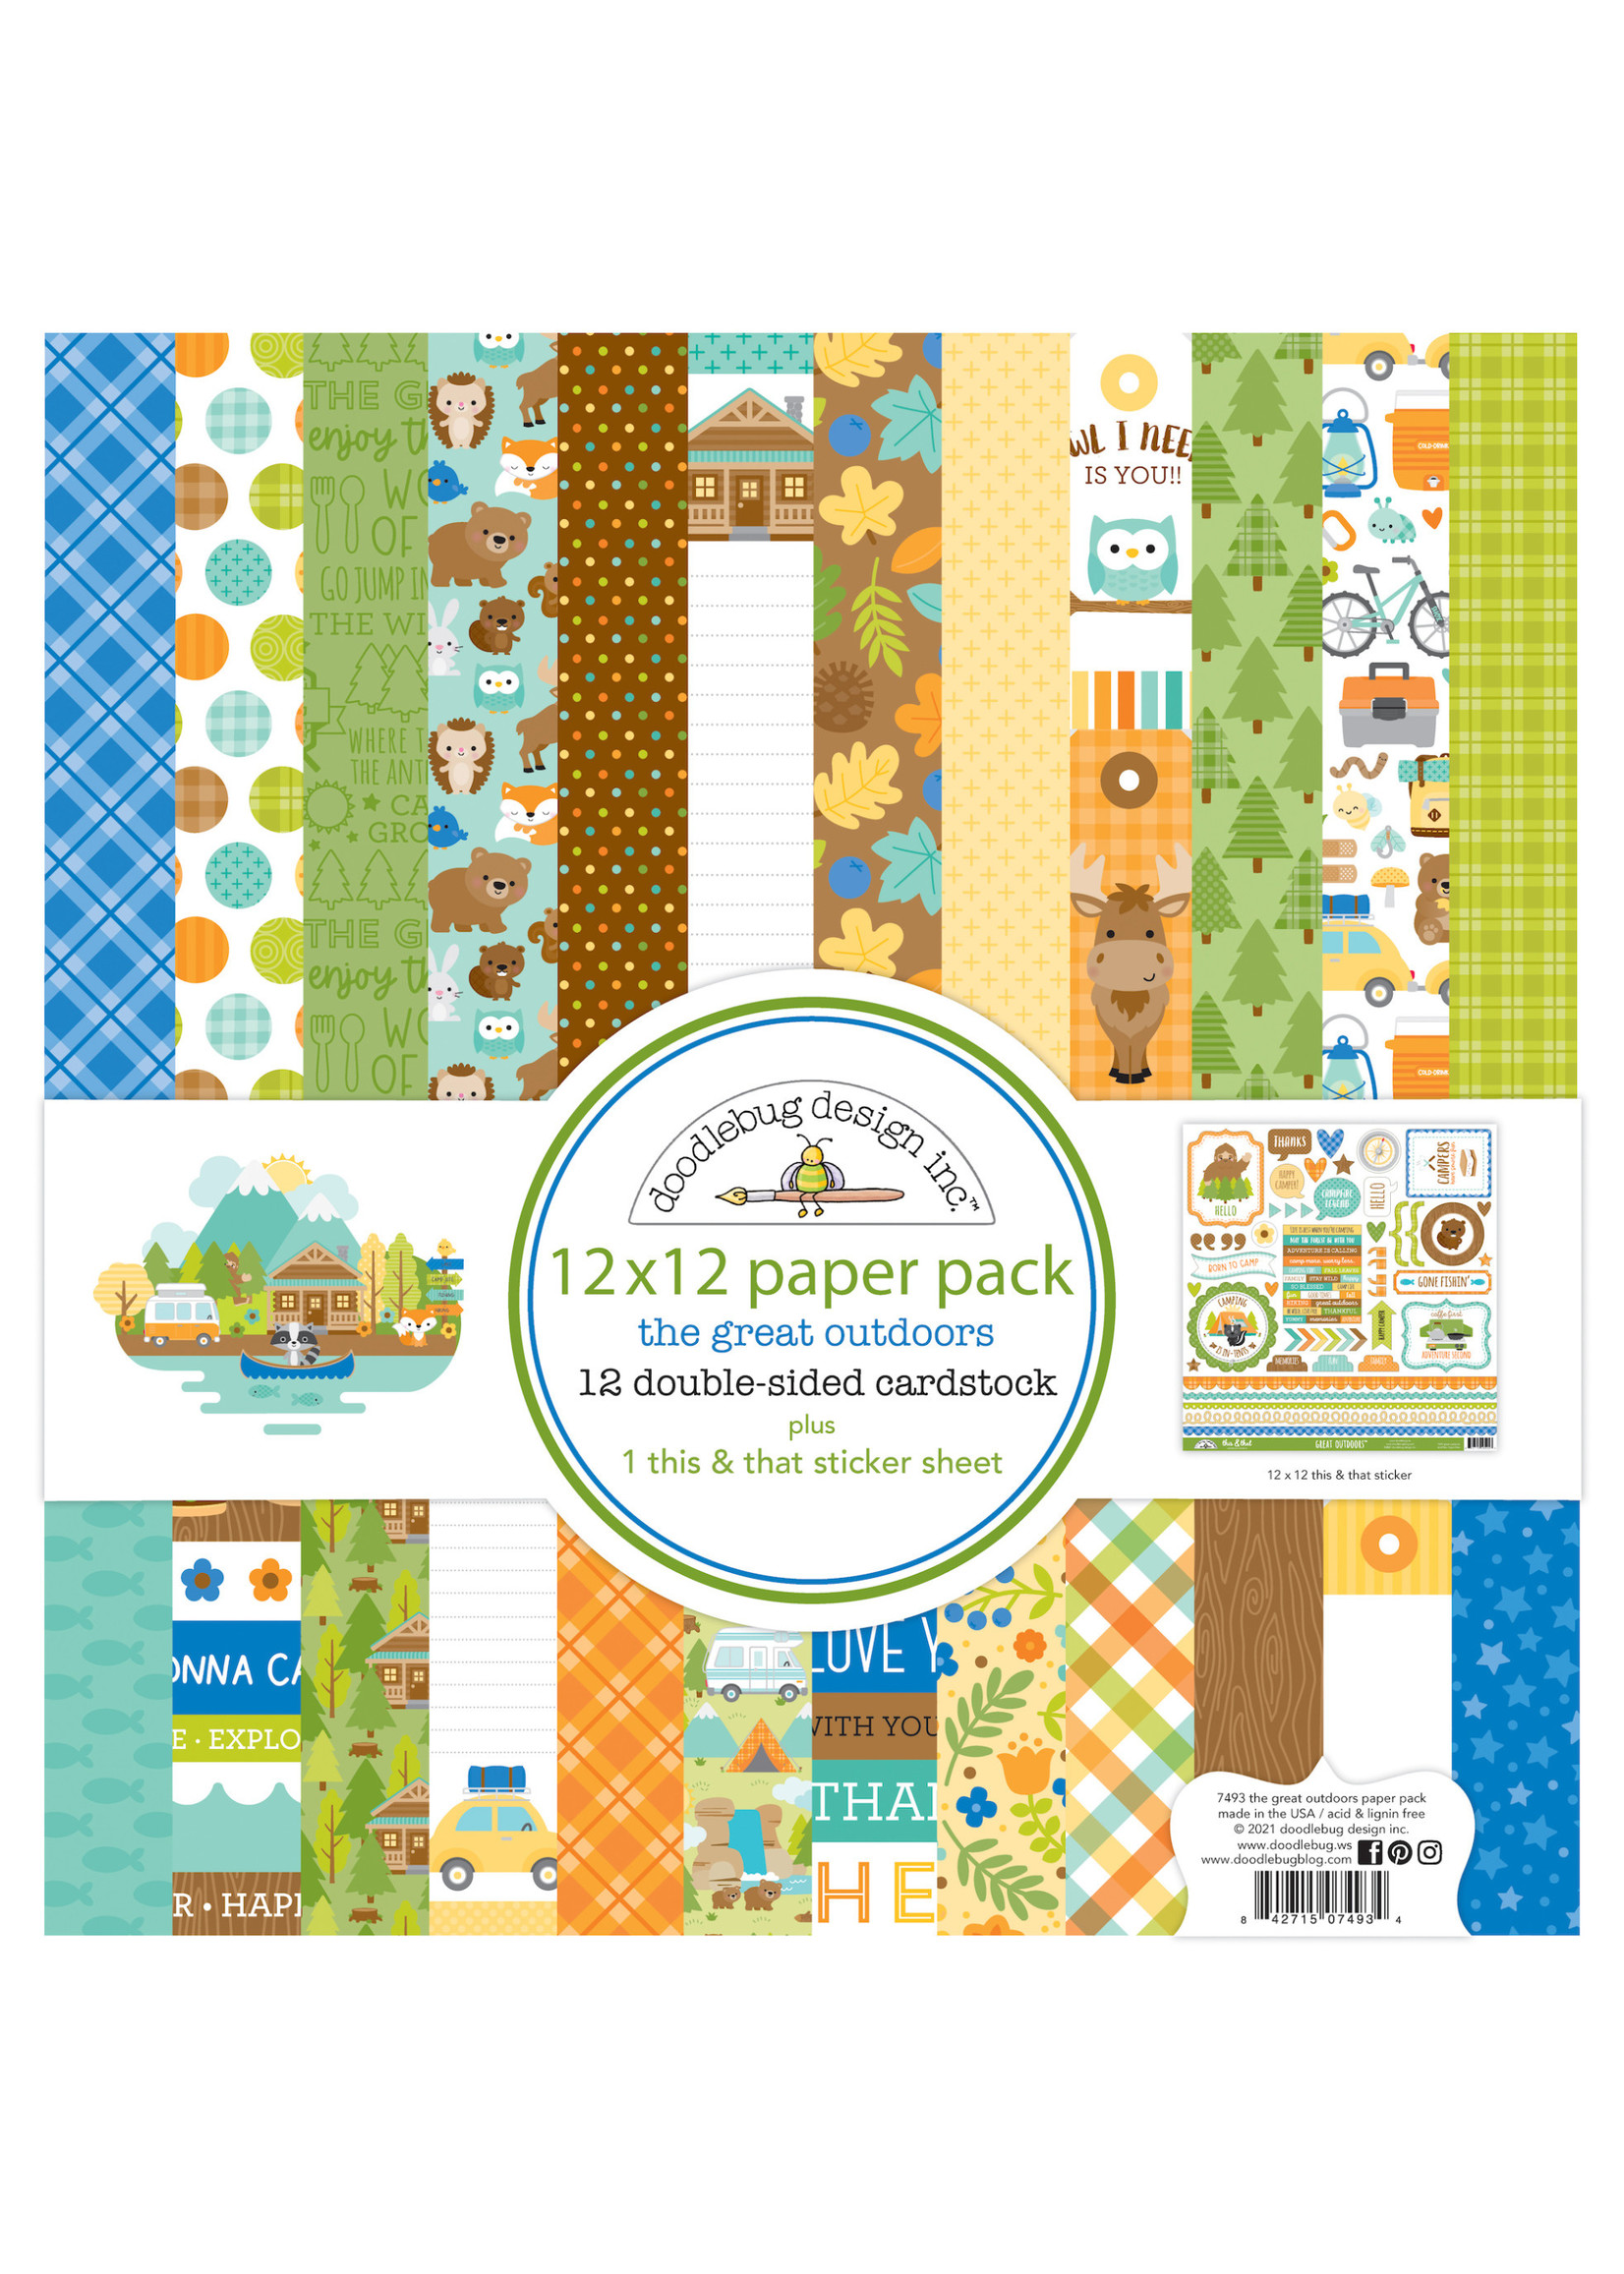 DOODLEBUG great outdoors 12x12 paper pack